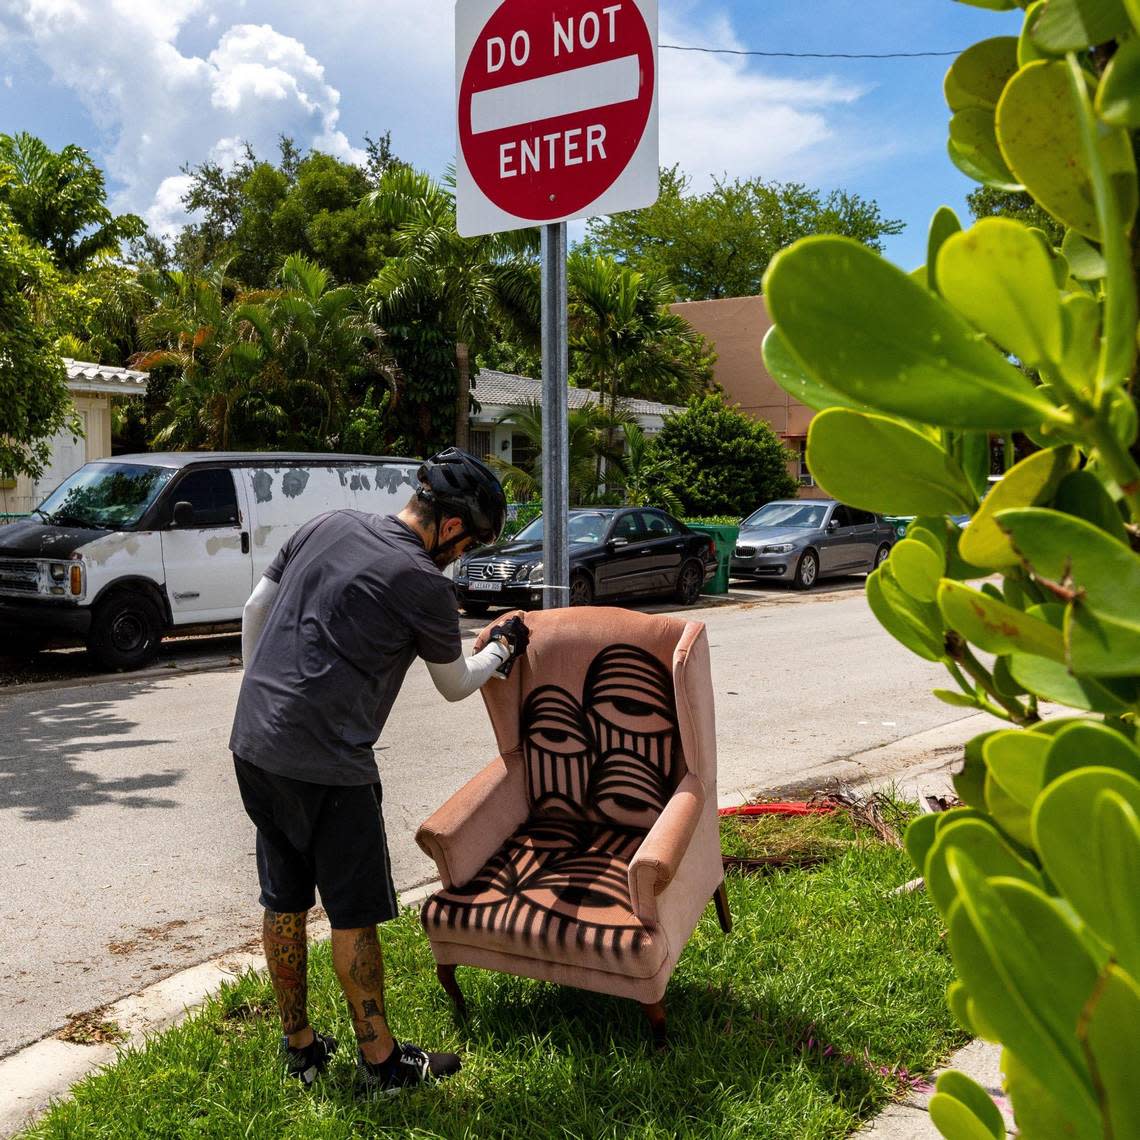 Local street artist Ahol Sniffs Glue draws on an arm chair that was left on the side of the road as trash. D.A. Varela/dvarela@miamiherald.com